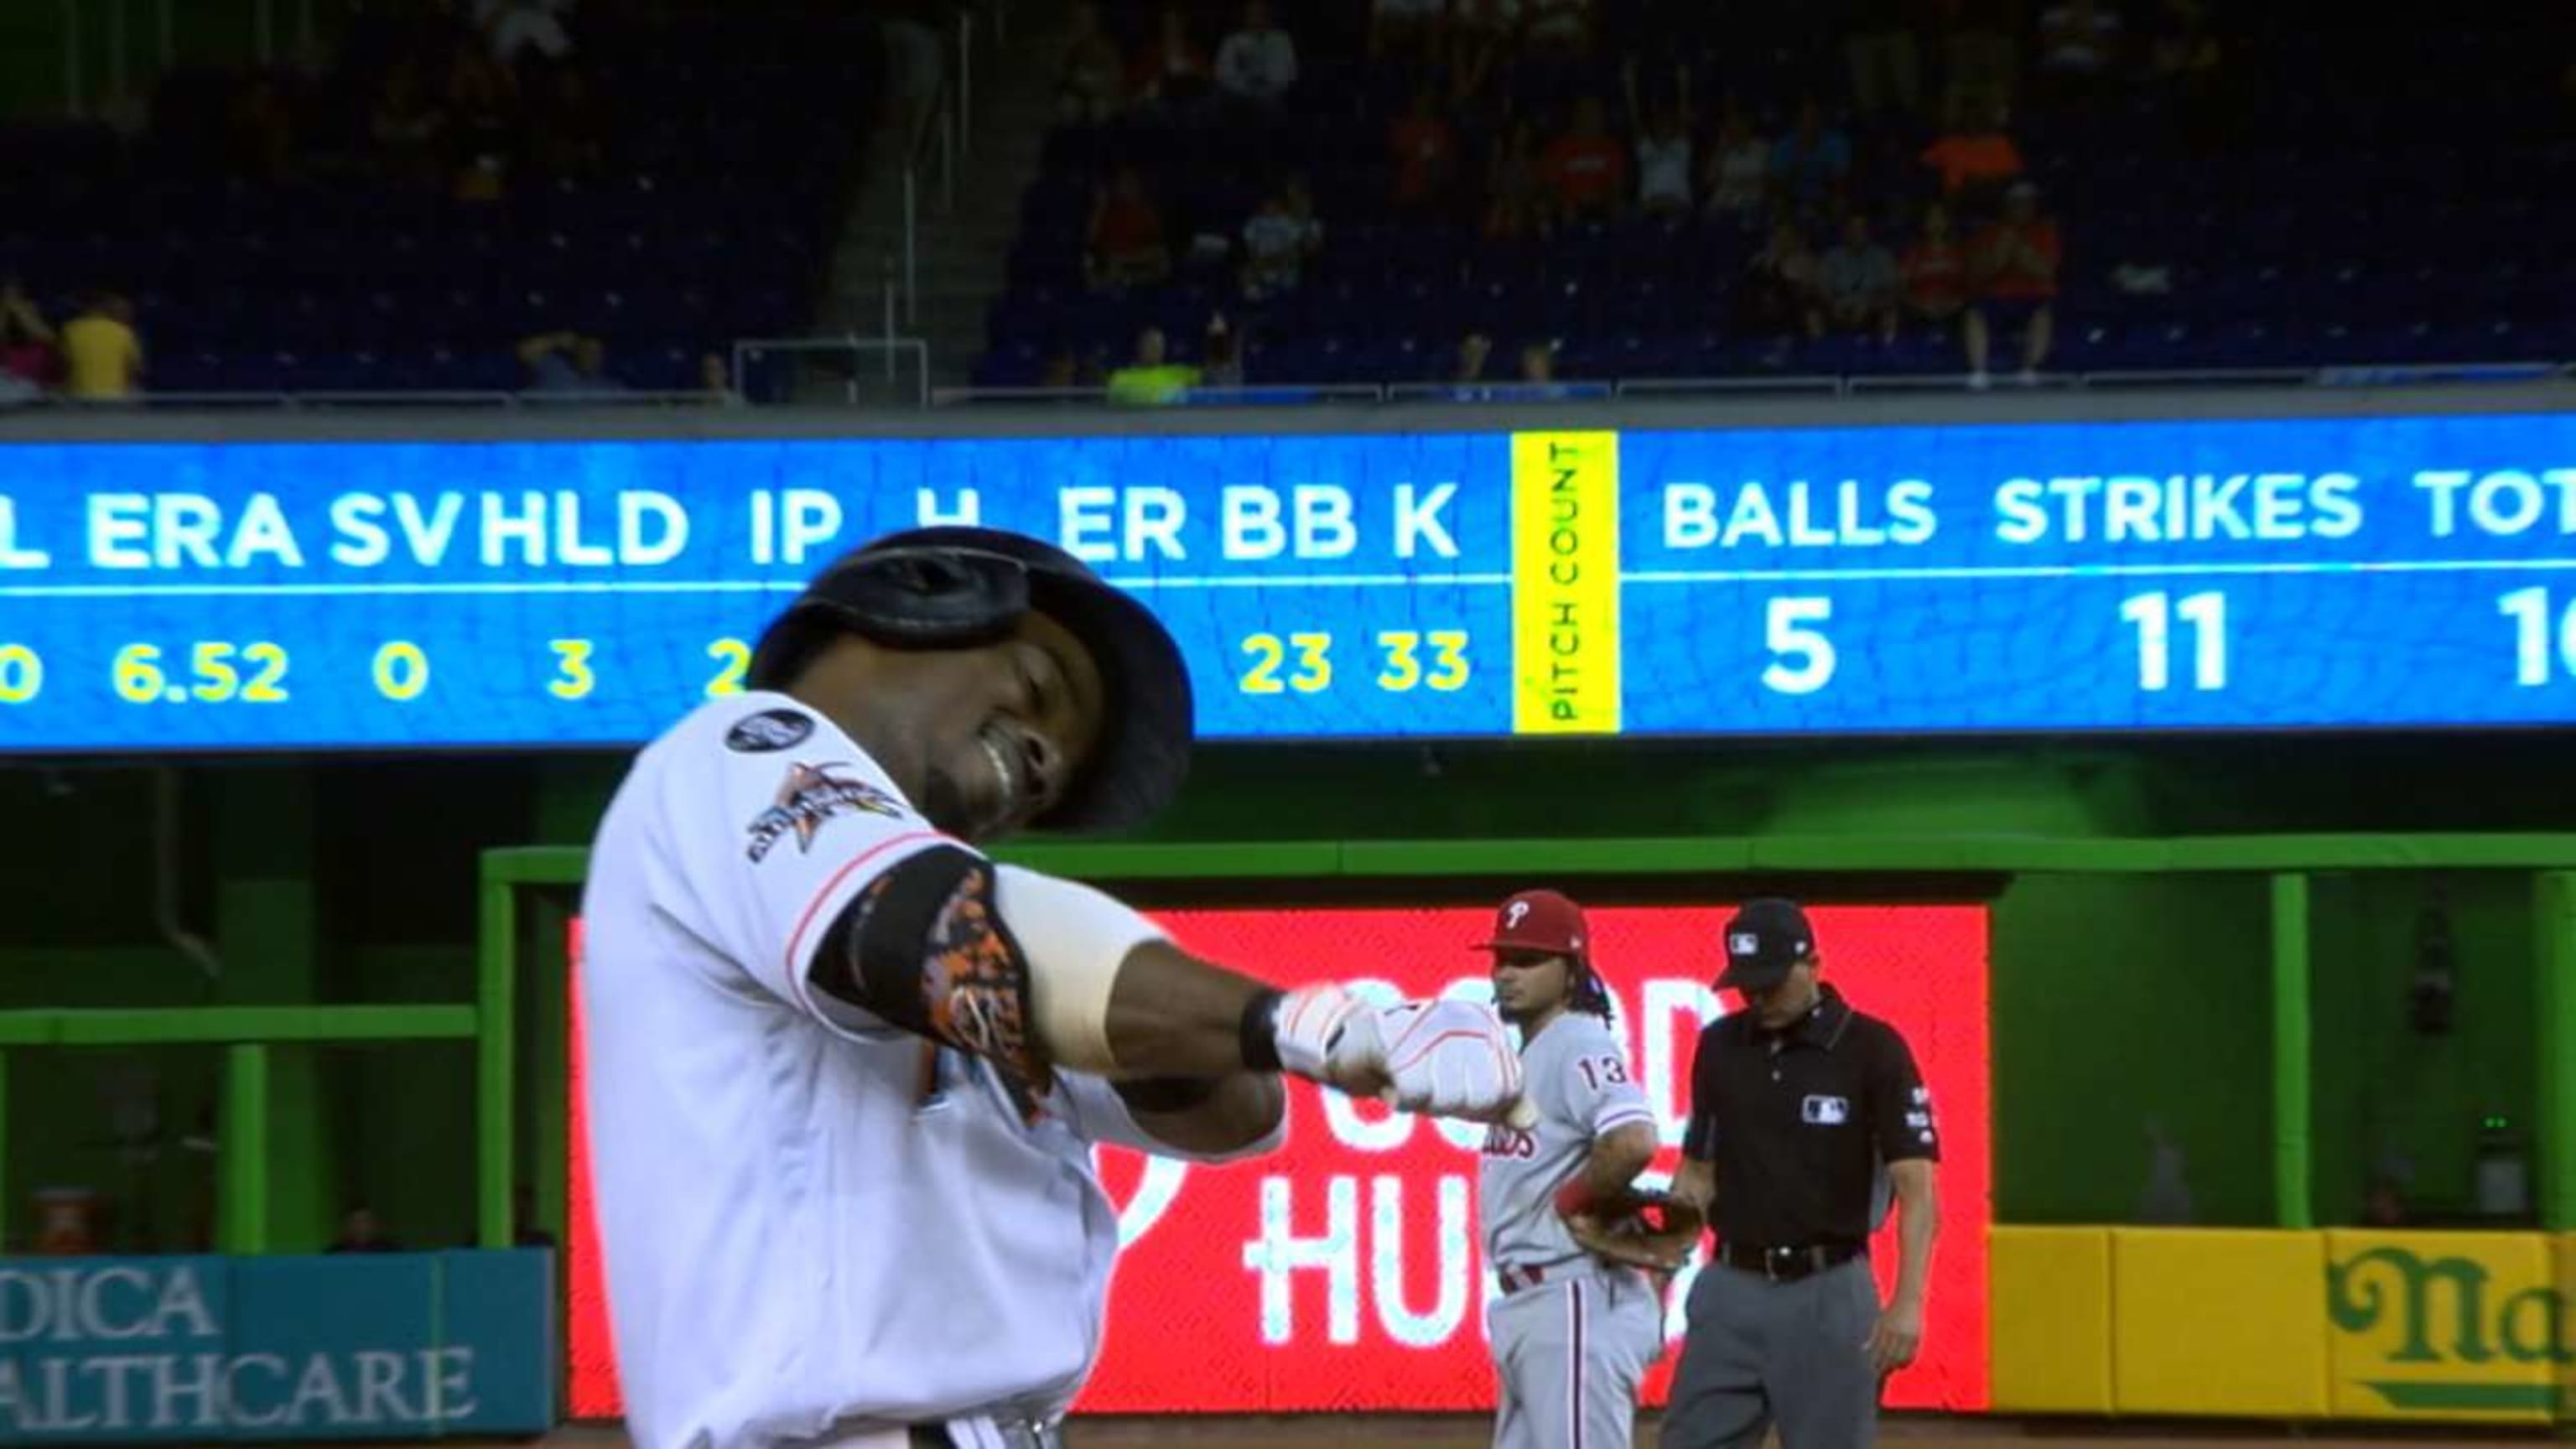 Dee Gordon went for the full Ken Griffey Jr. look during the